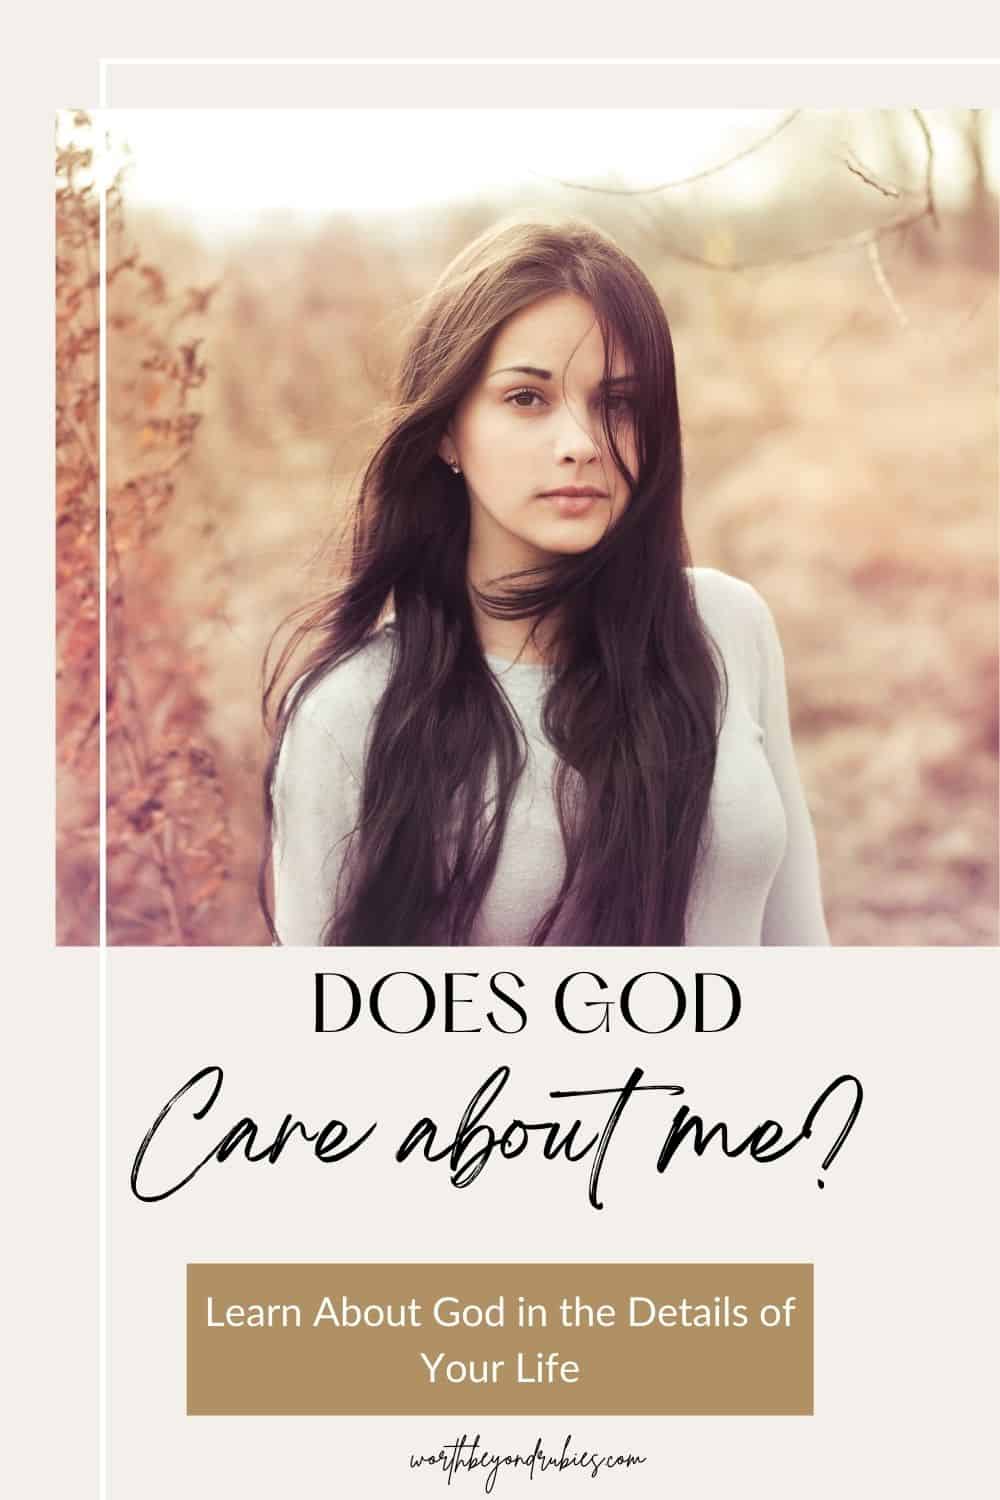 A woman standing in a field looking into the camera and text that says Does God Care About Me? - Learn About God in the Details of Your Life